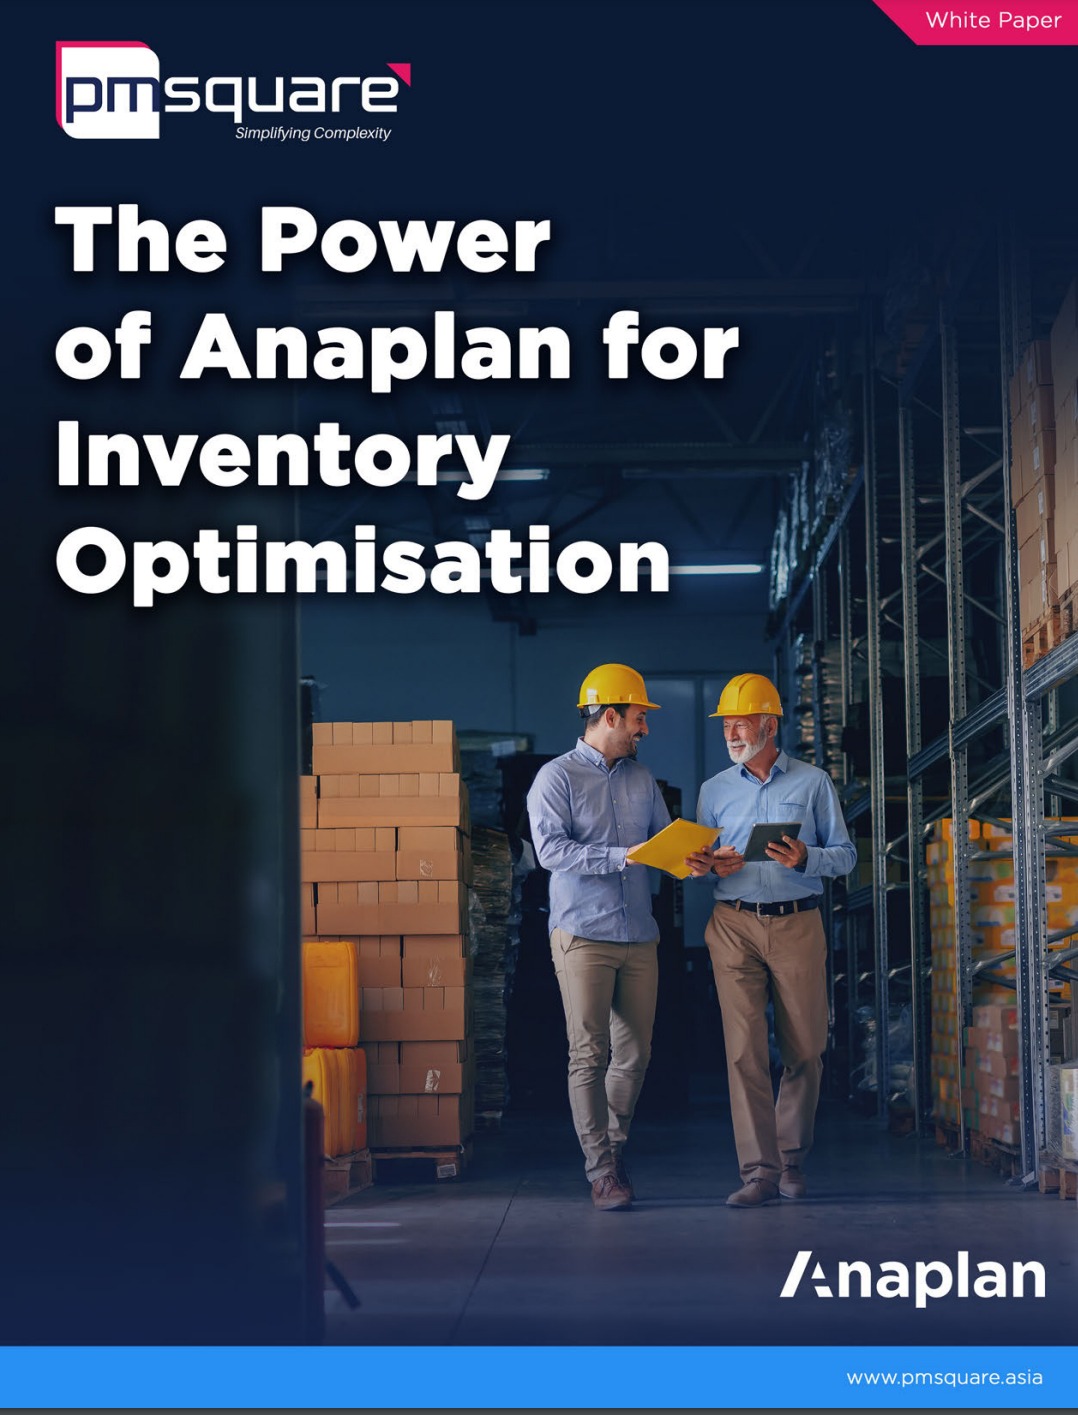 The power of Anaplan for inventory optimisation